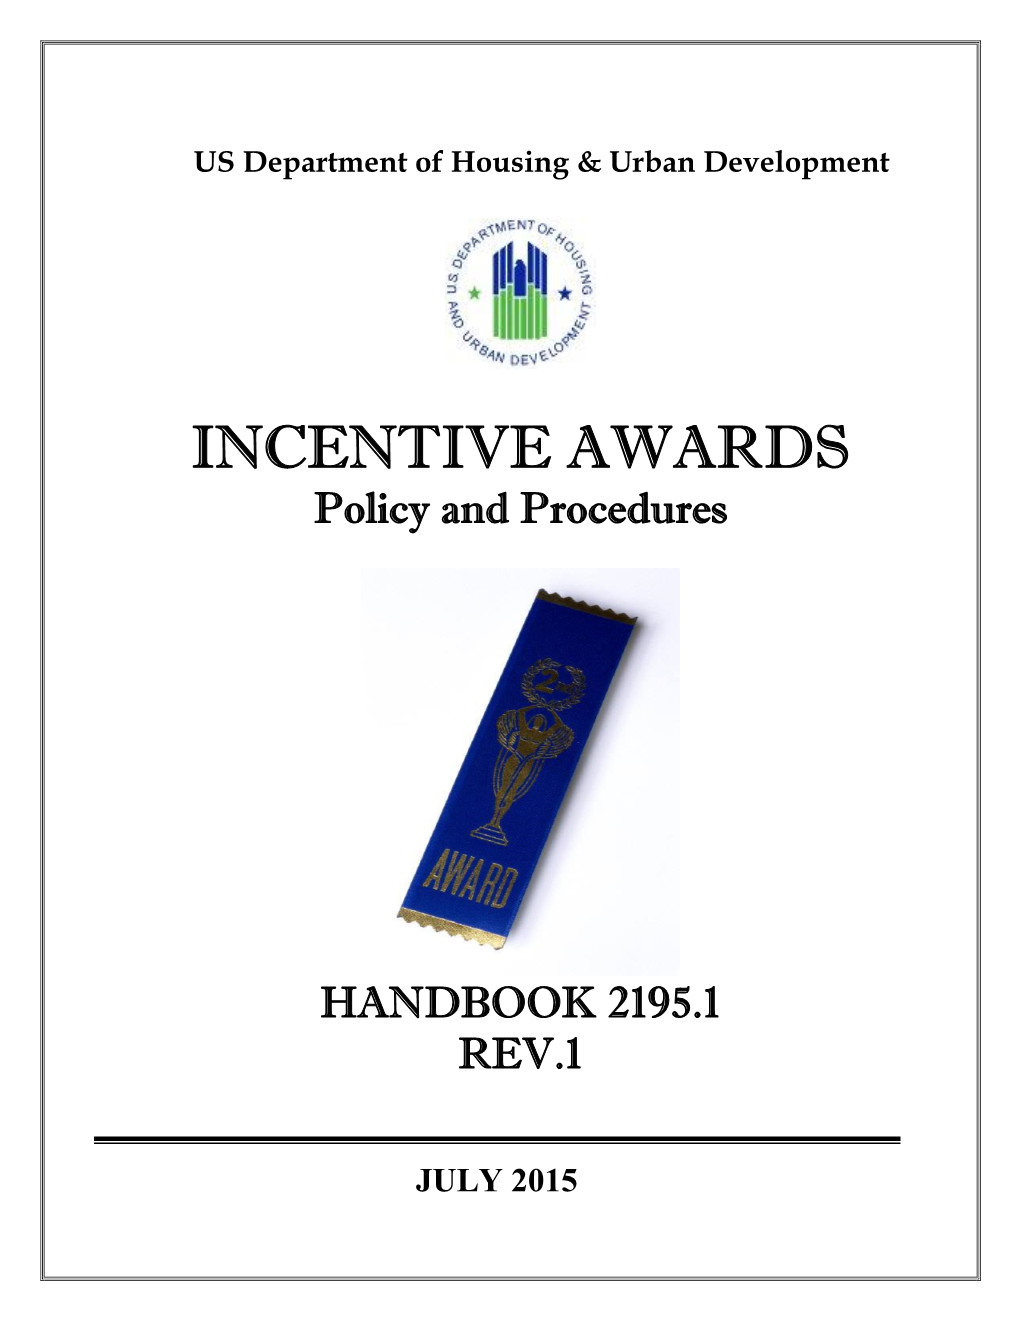 INCENTIVE AWARDS Policy and Procedures DocsLib